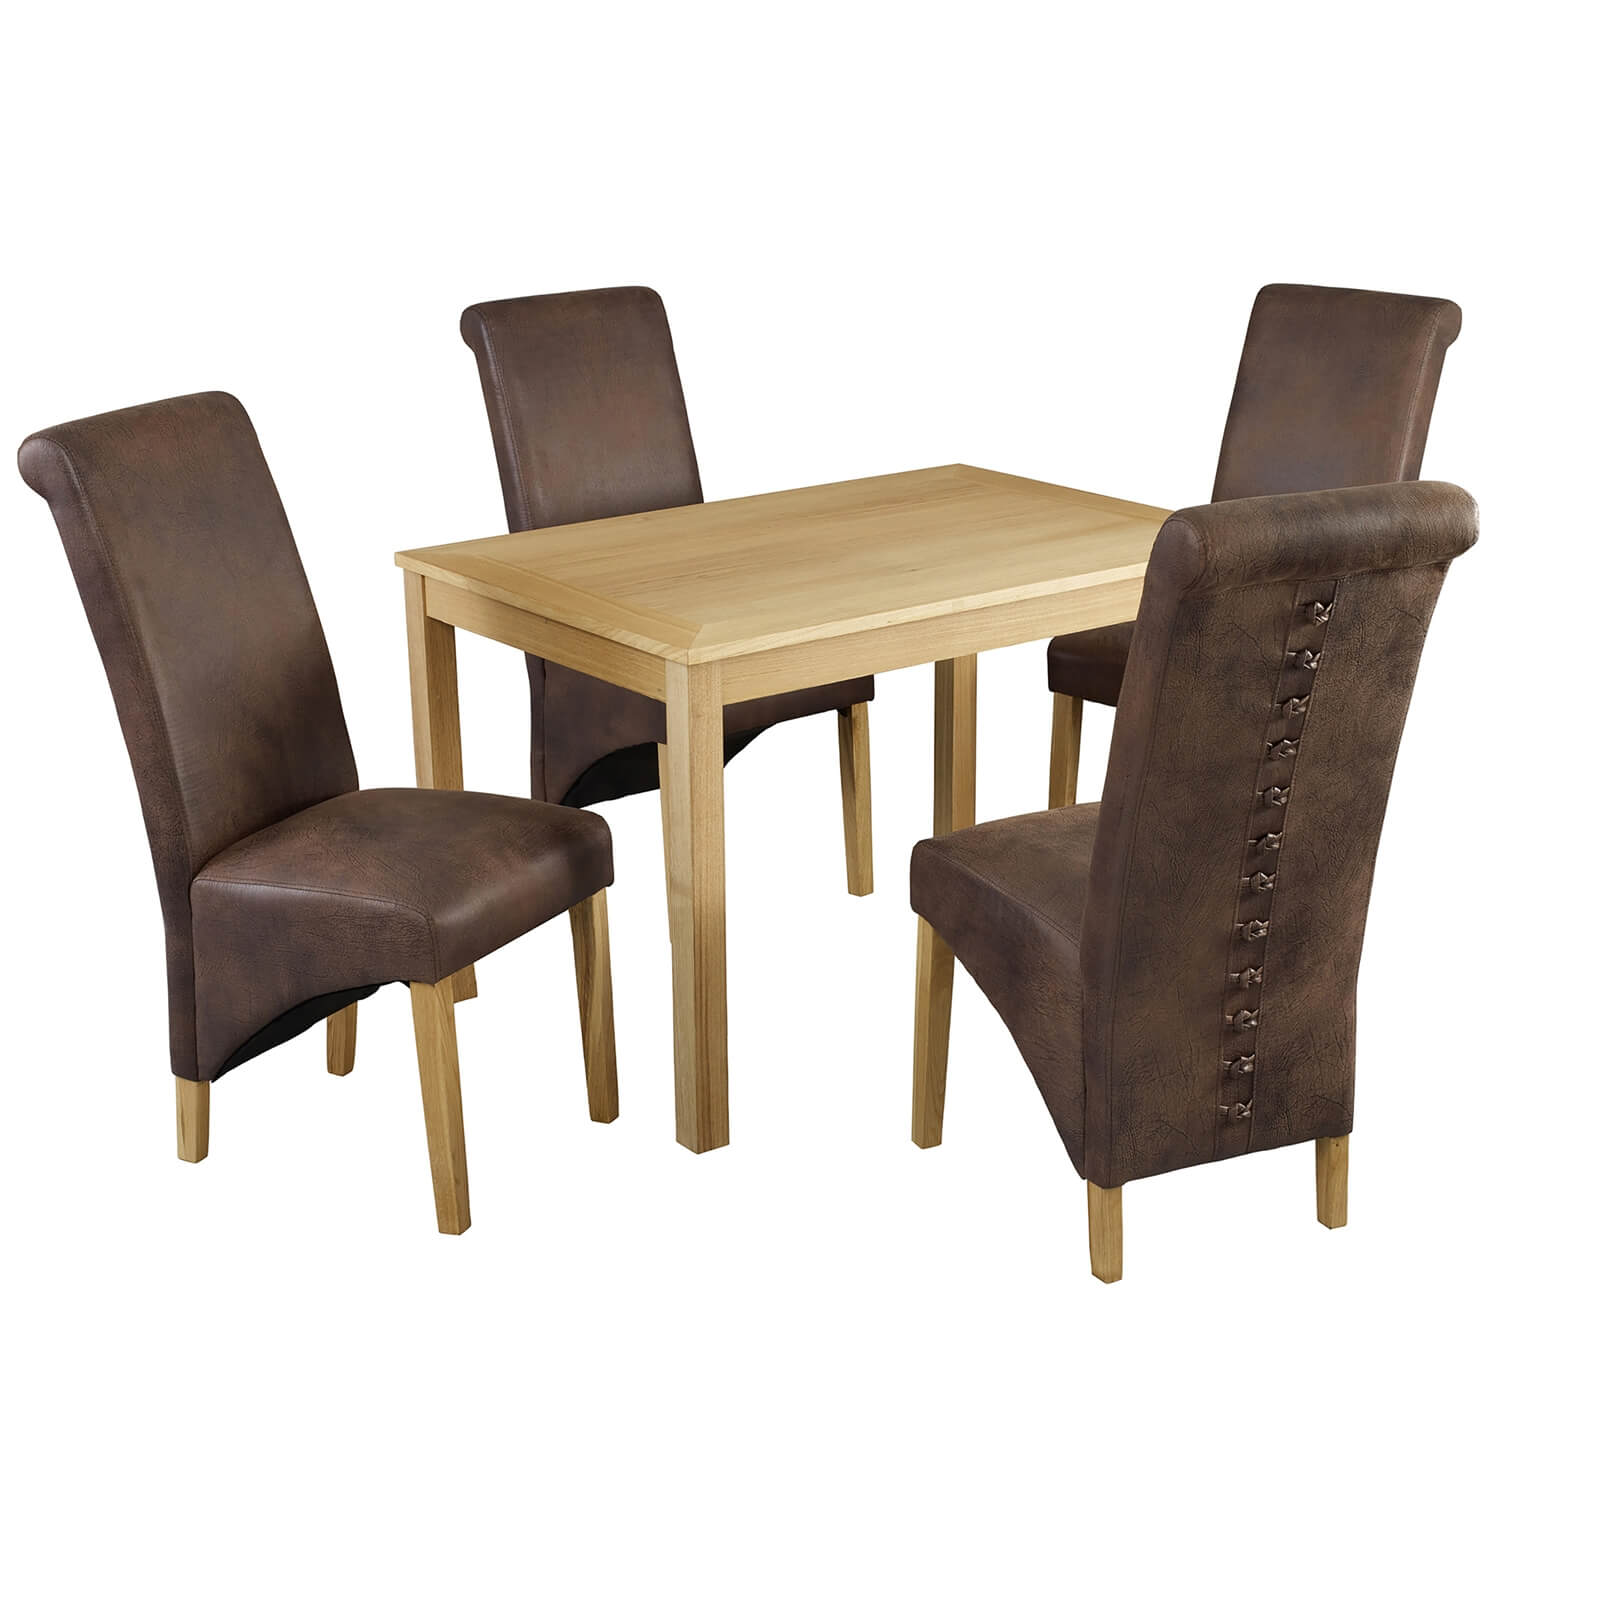 Oakridge 4 Seater Dining Set - Treviso Dining Chairs - Brown